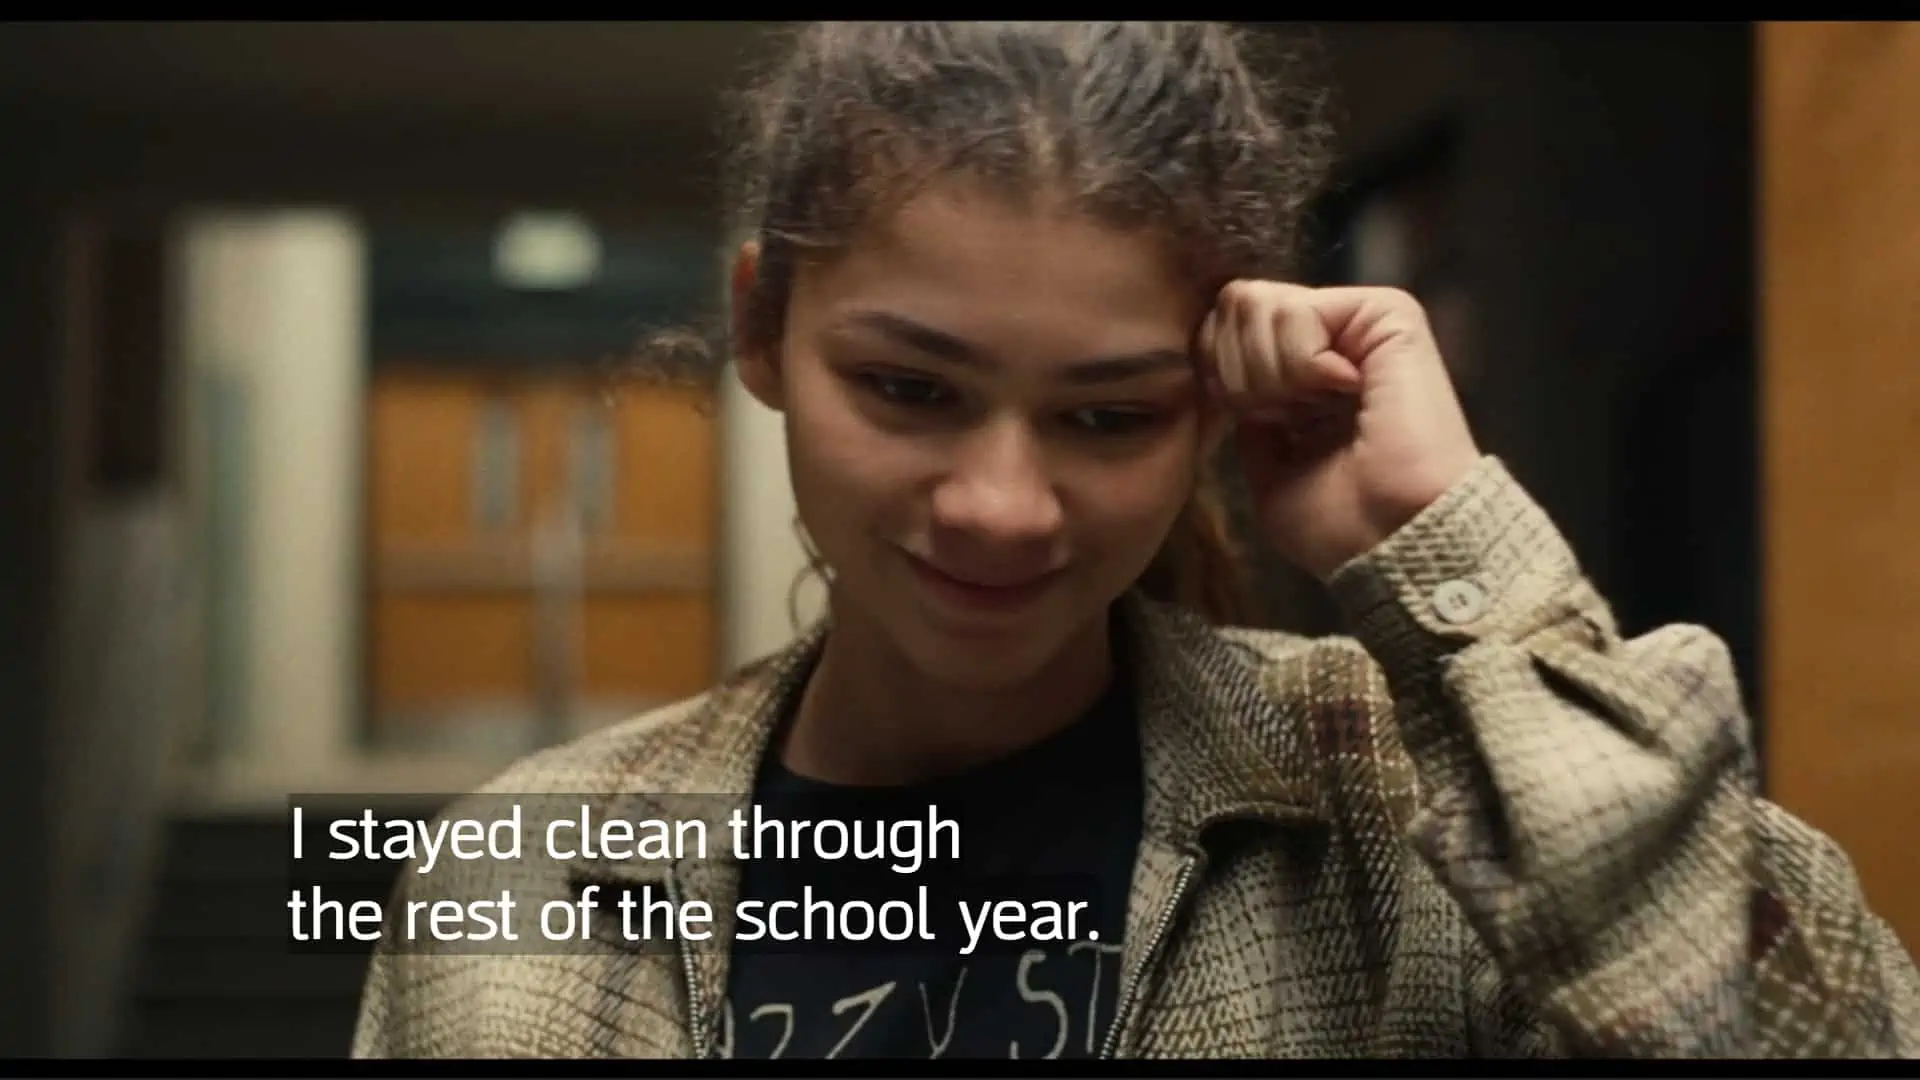 Rue revealing she stayed clean for months